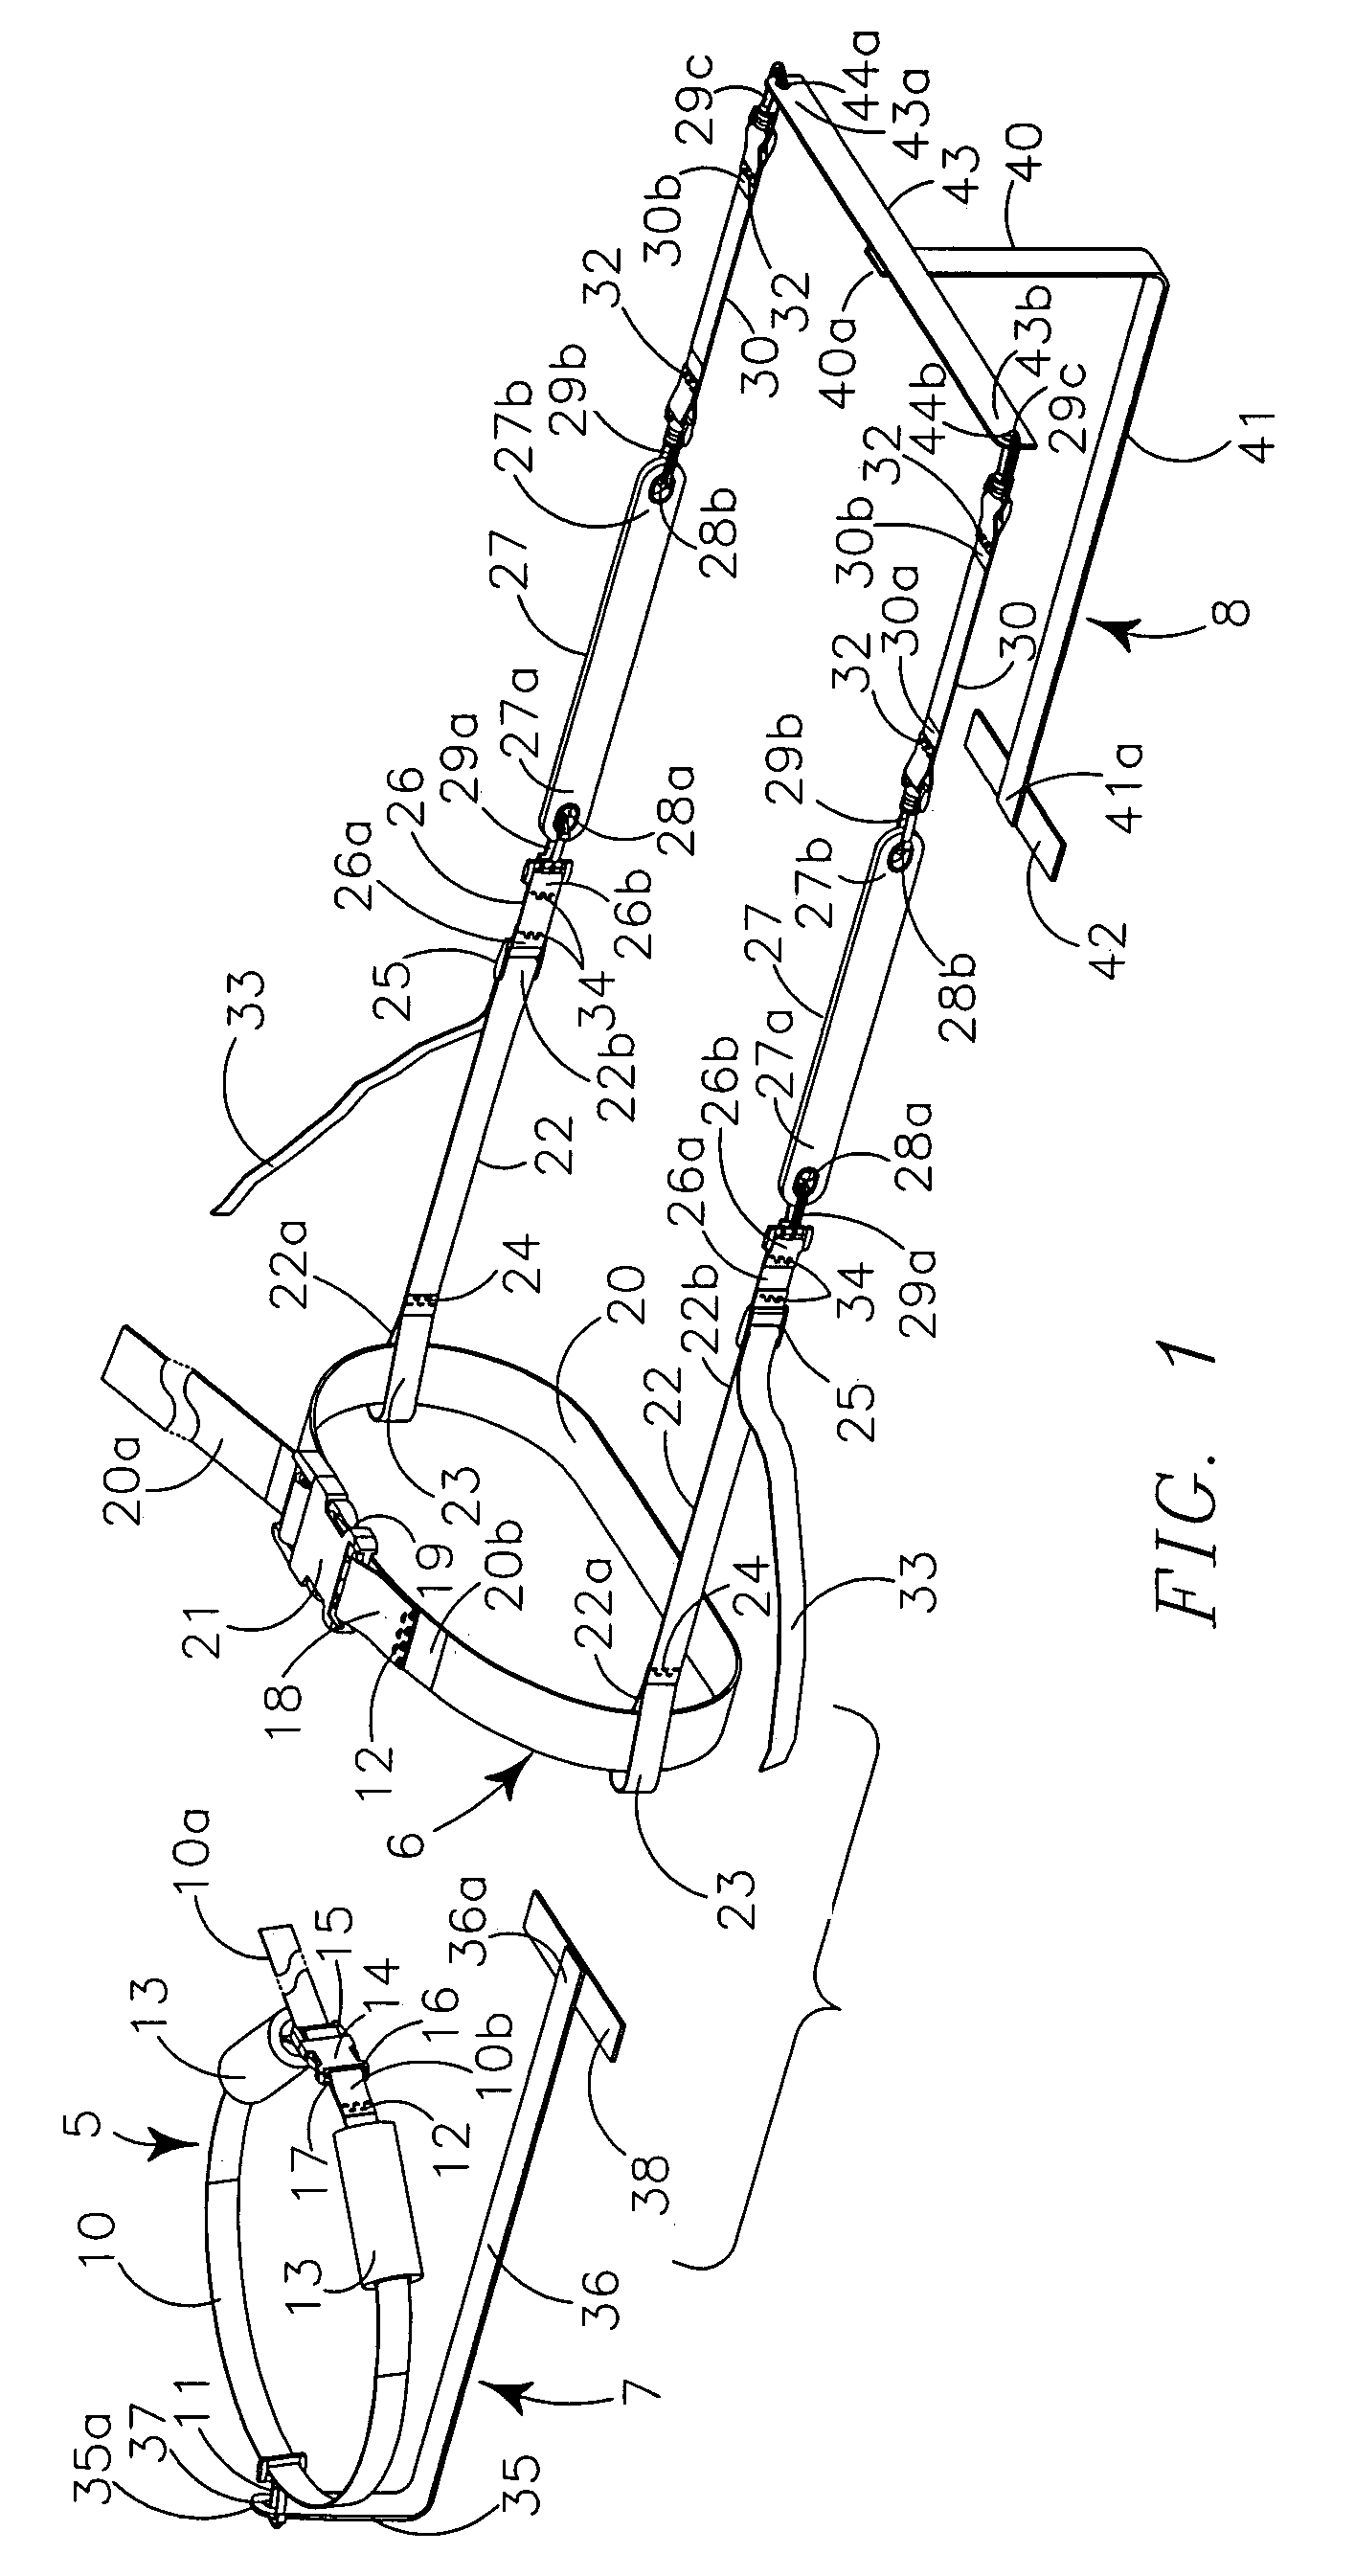 Device for self administration of lumbar traction